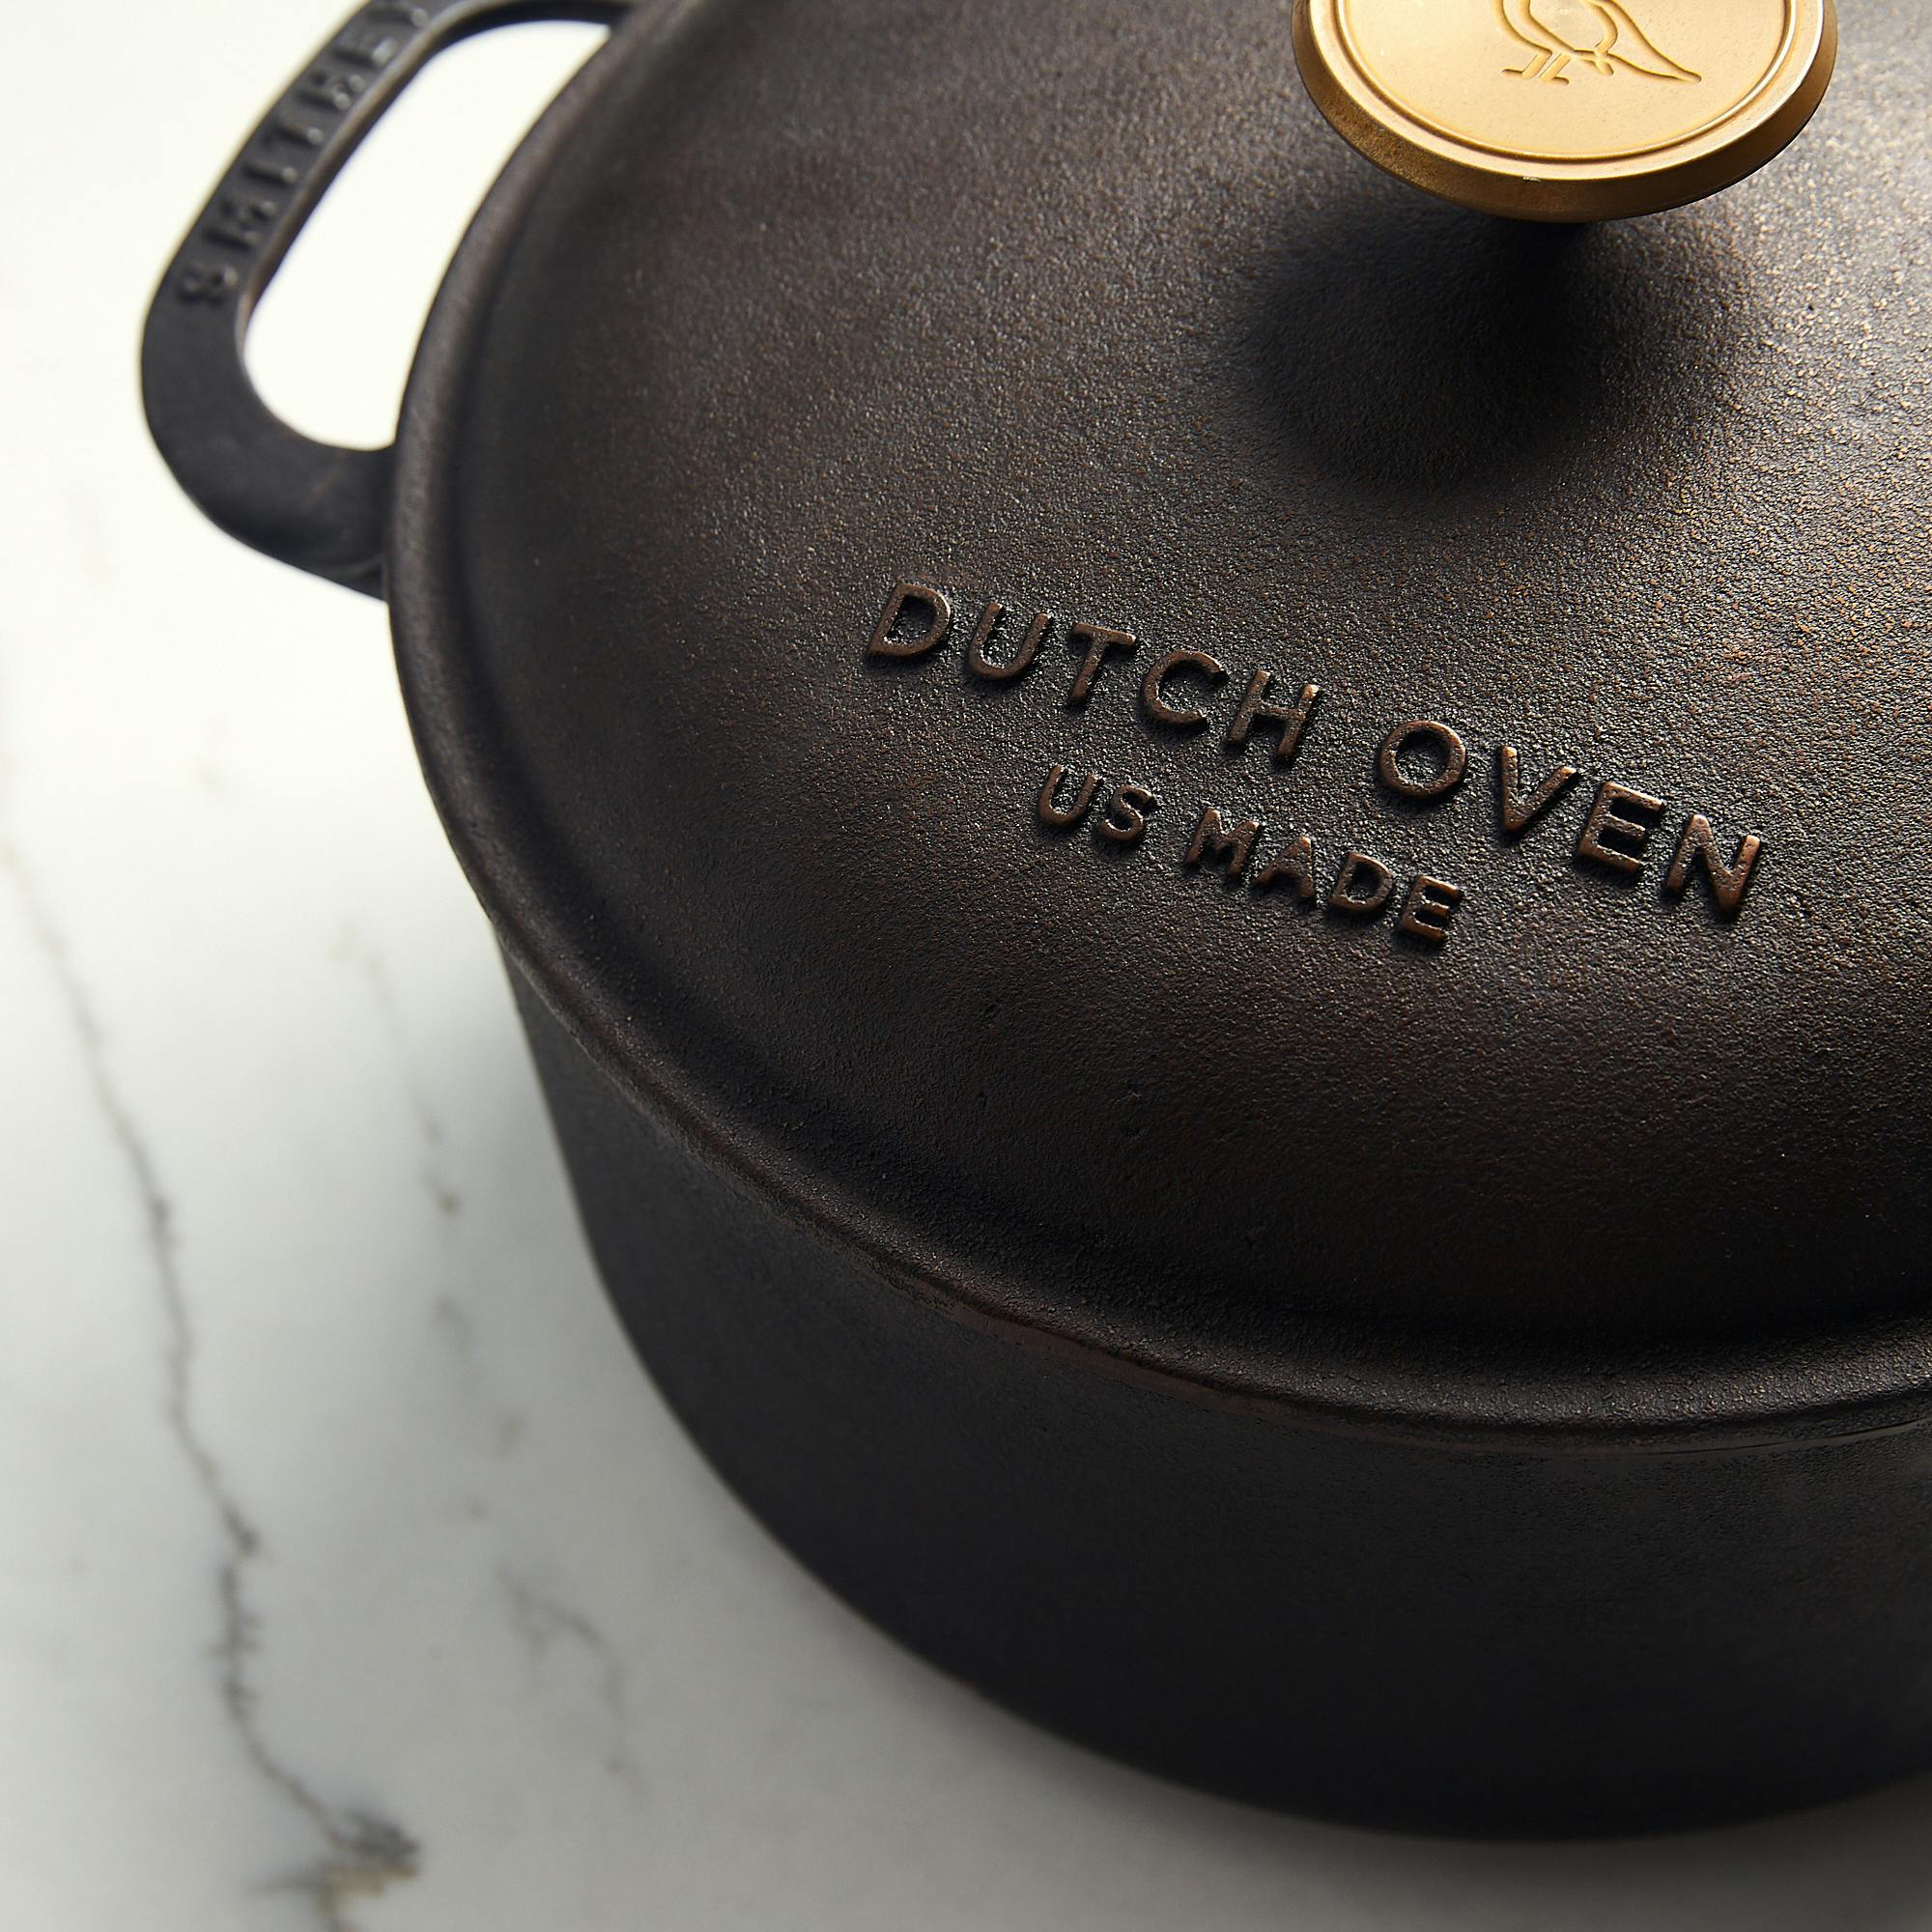 Smithey Ironware Co. 5.5 QT Dutch Oven